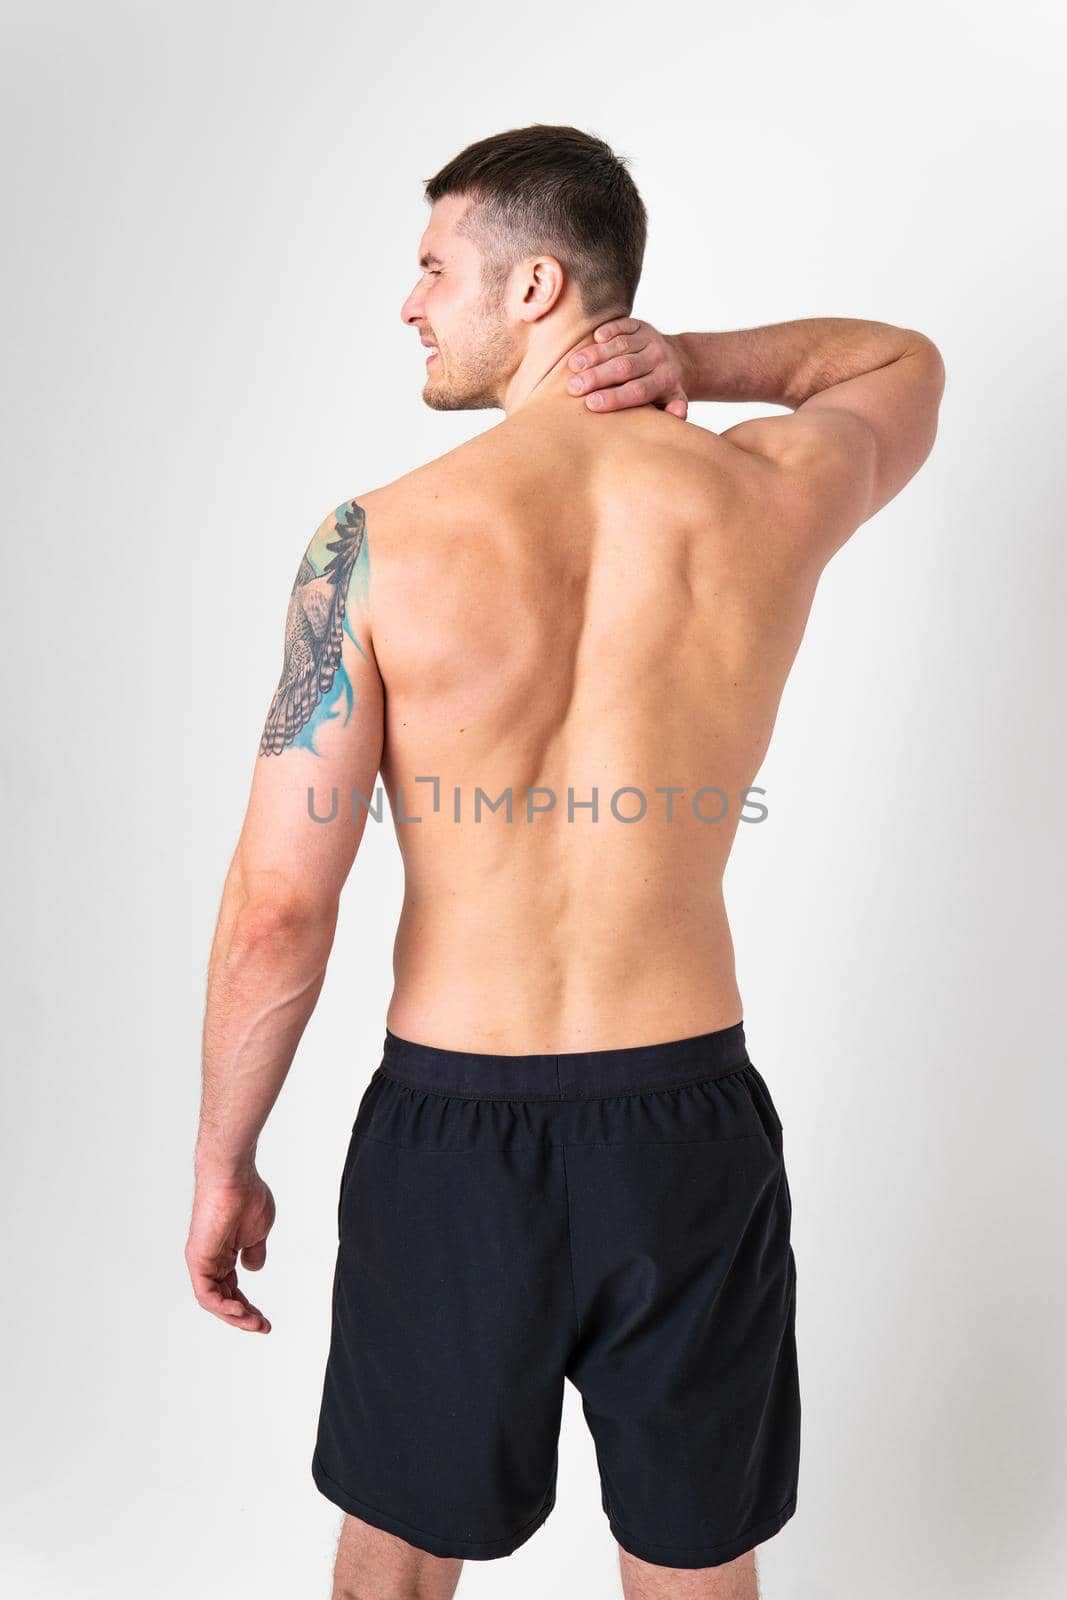 The muscles of the neck in a man on a white background are hurt back body cramp person man young stress, hand expression. Touching red sickness, disease suffer attractive